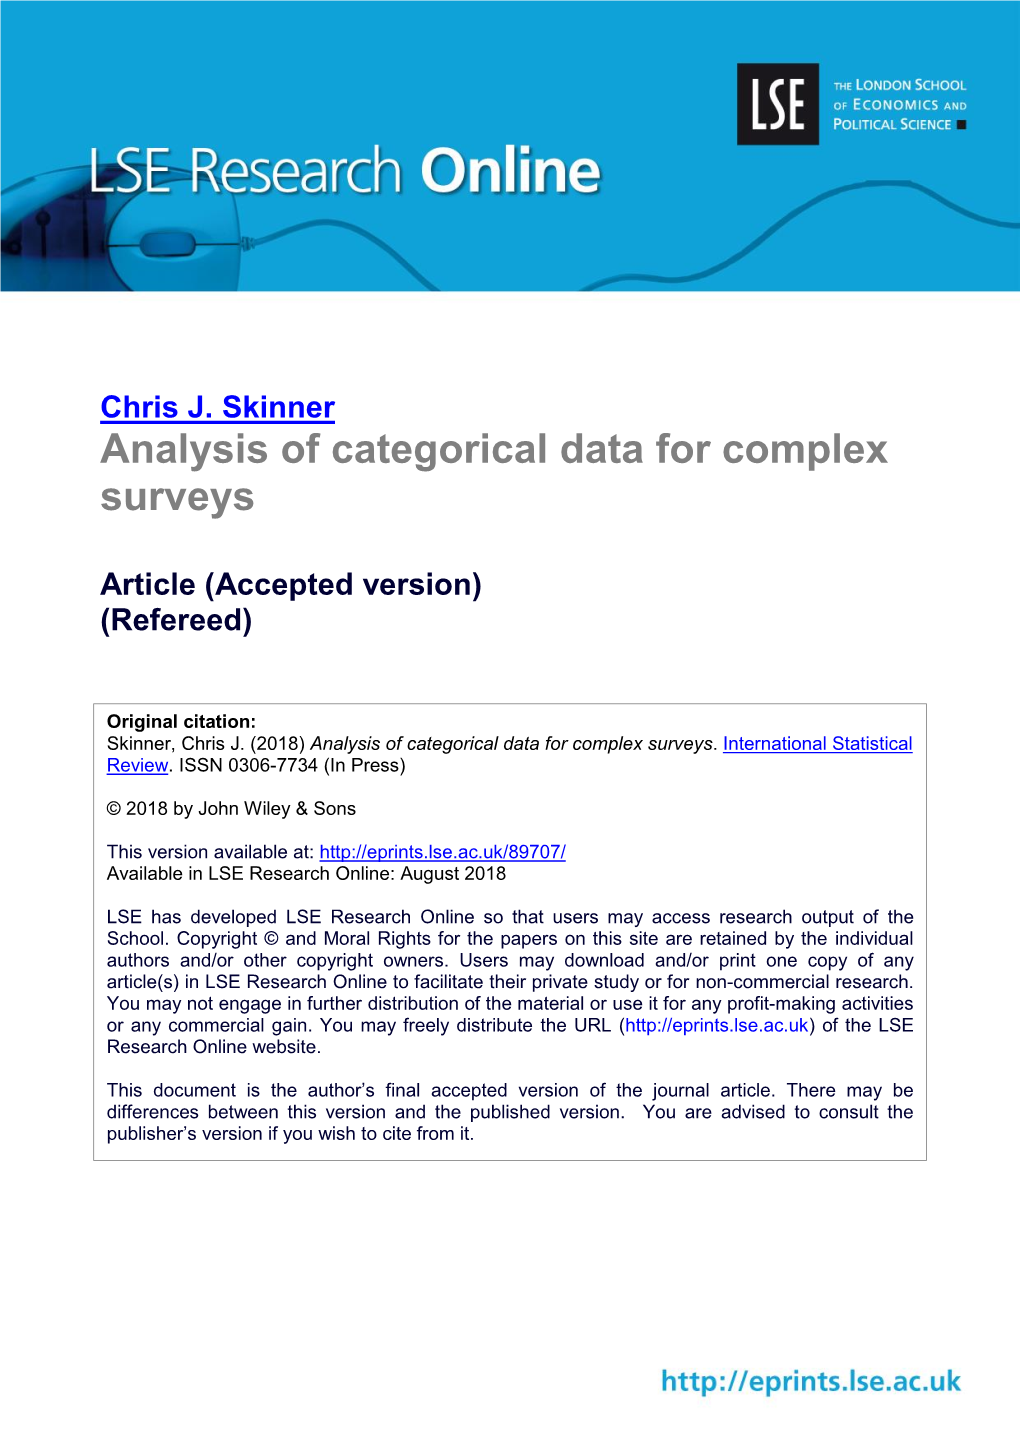 Analysis of Categorical Data for Complex Surveys